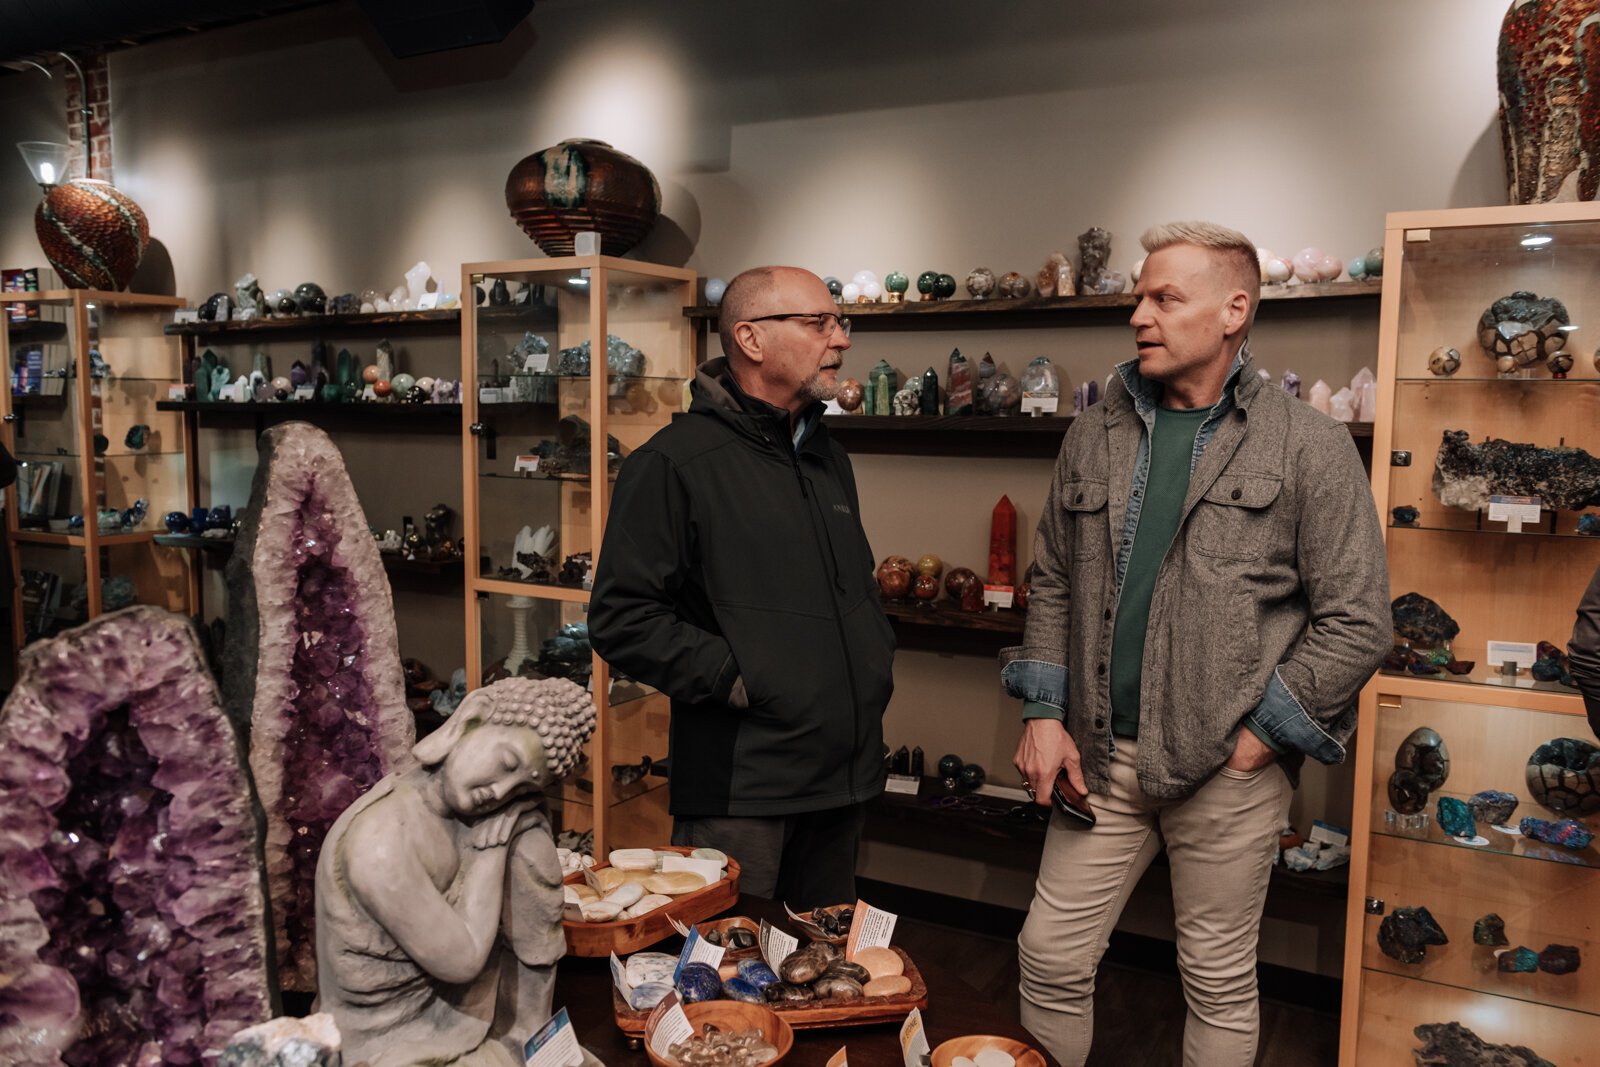 David Lee, right, talks with Jim Hoch, who was the architect of 2 Crazy Crystal Guys' new store at 4007 S Wayne Ave, Fort Wayne, IN.